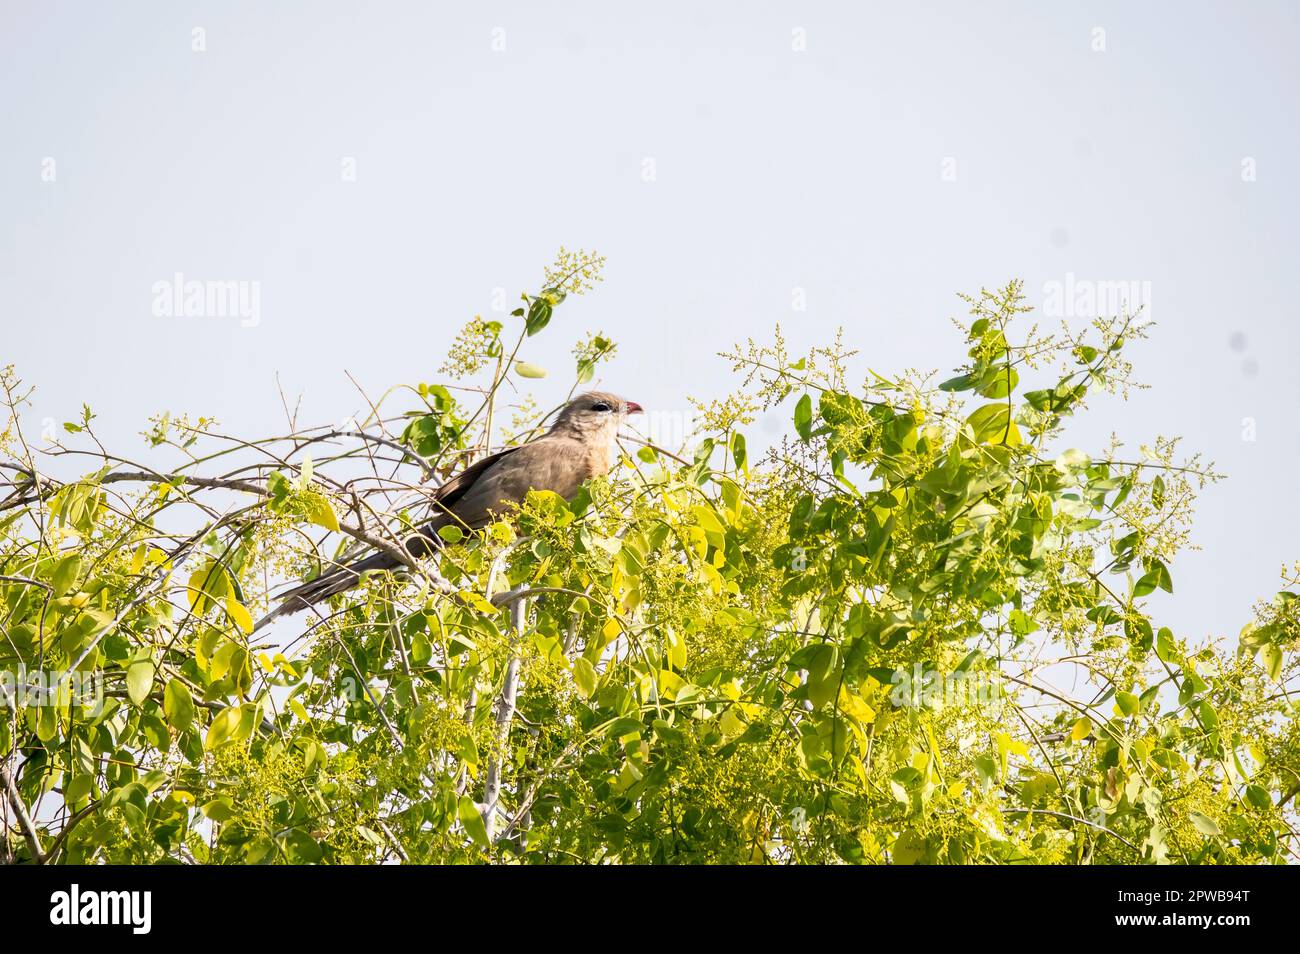 A sirkeer malkoha perched on a branch of a berry tree close to a water body inside Wild Ass sanctuary in Gujarat's lesser rann of kutch area Stock Photo